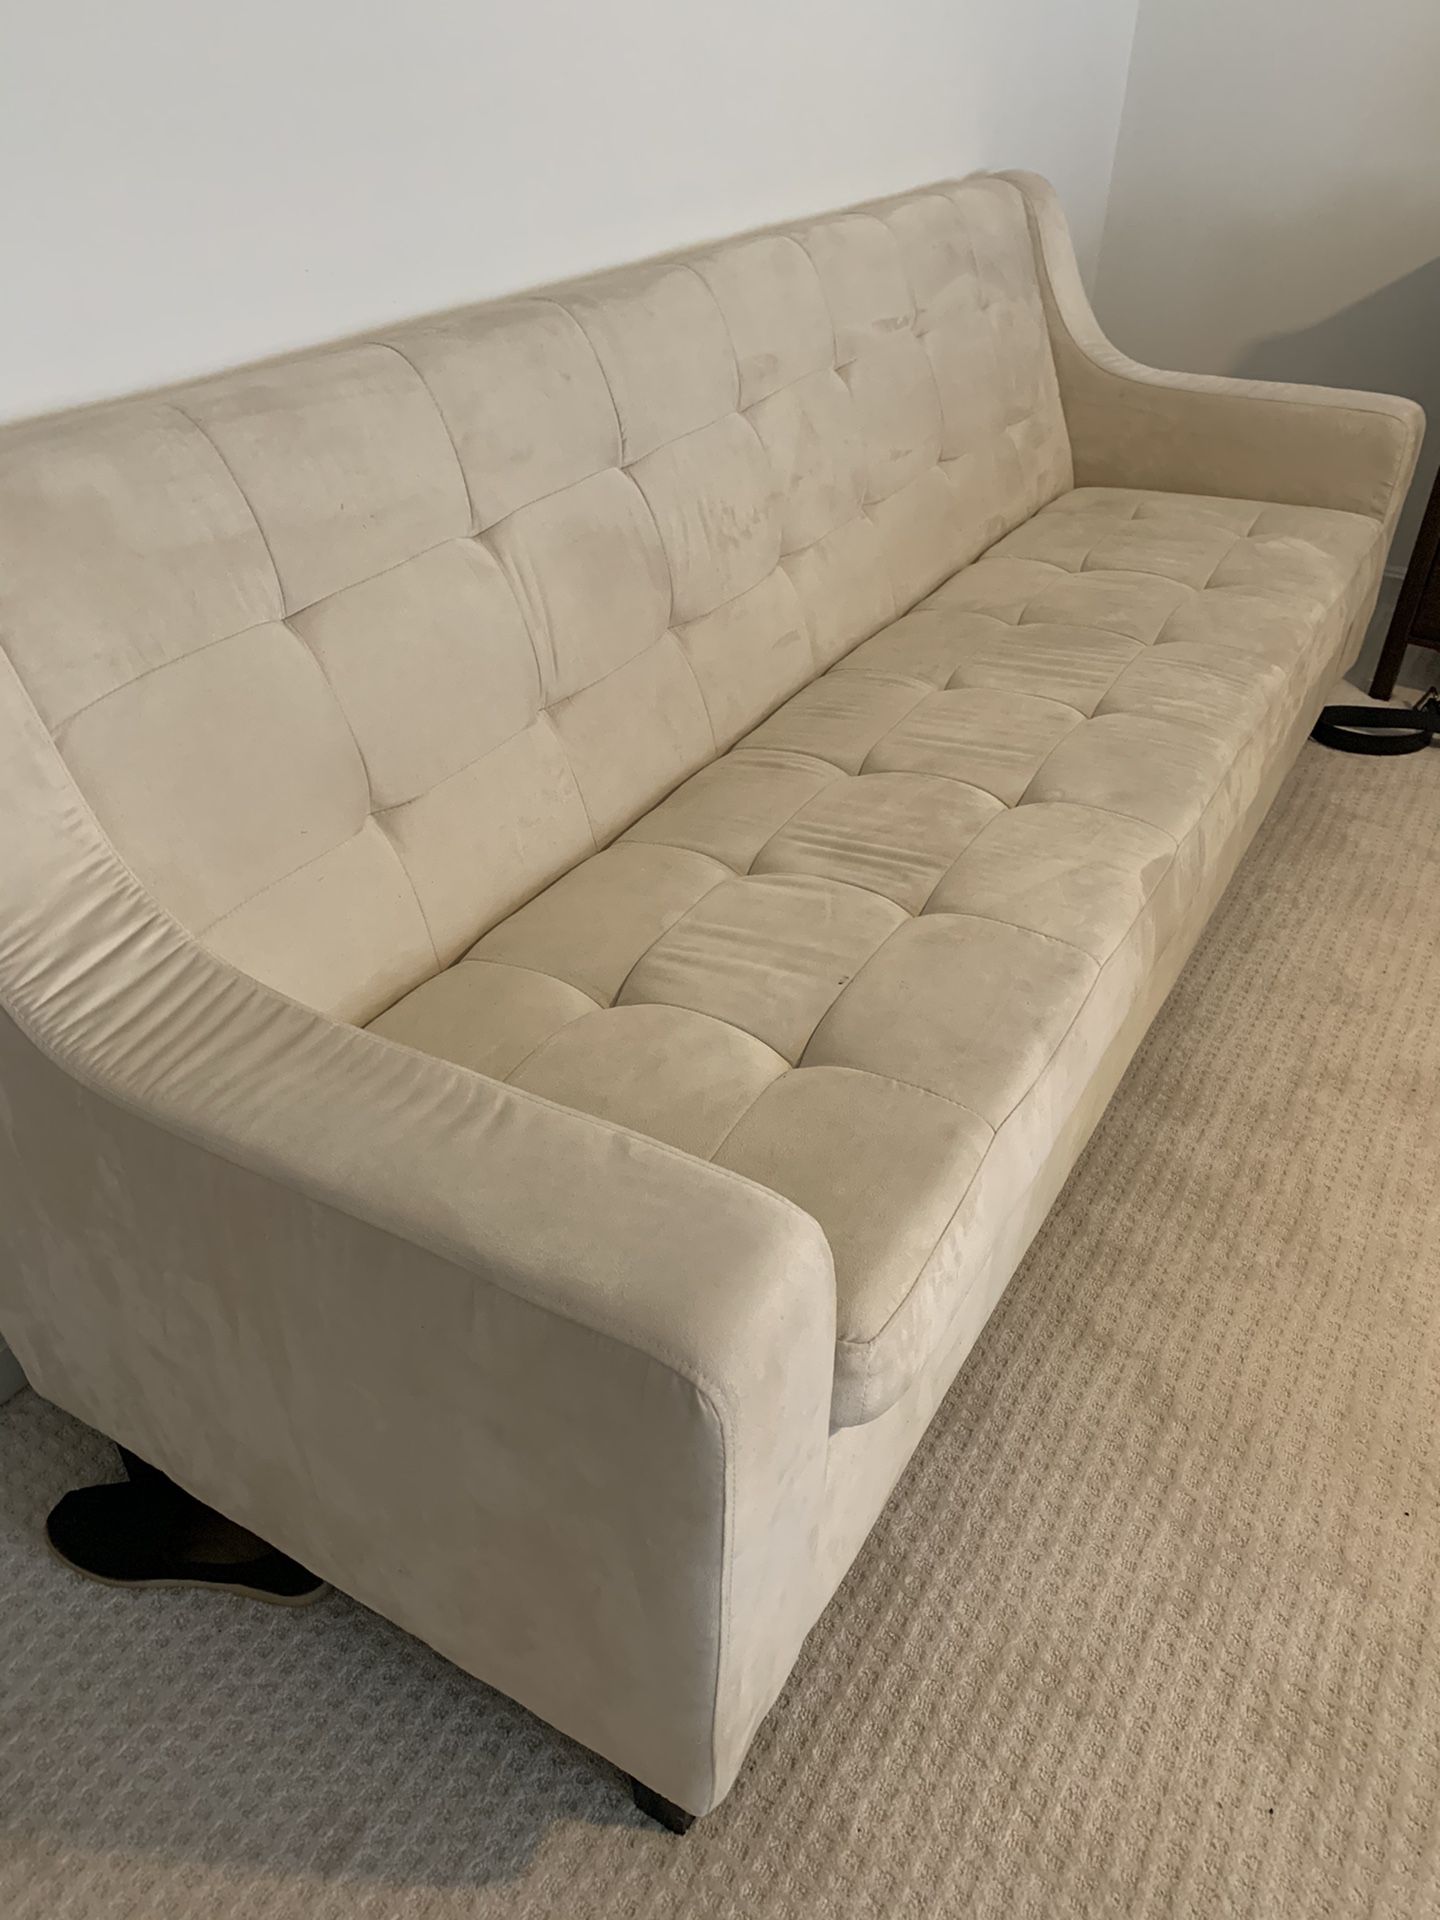 Ivory couch, great condition